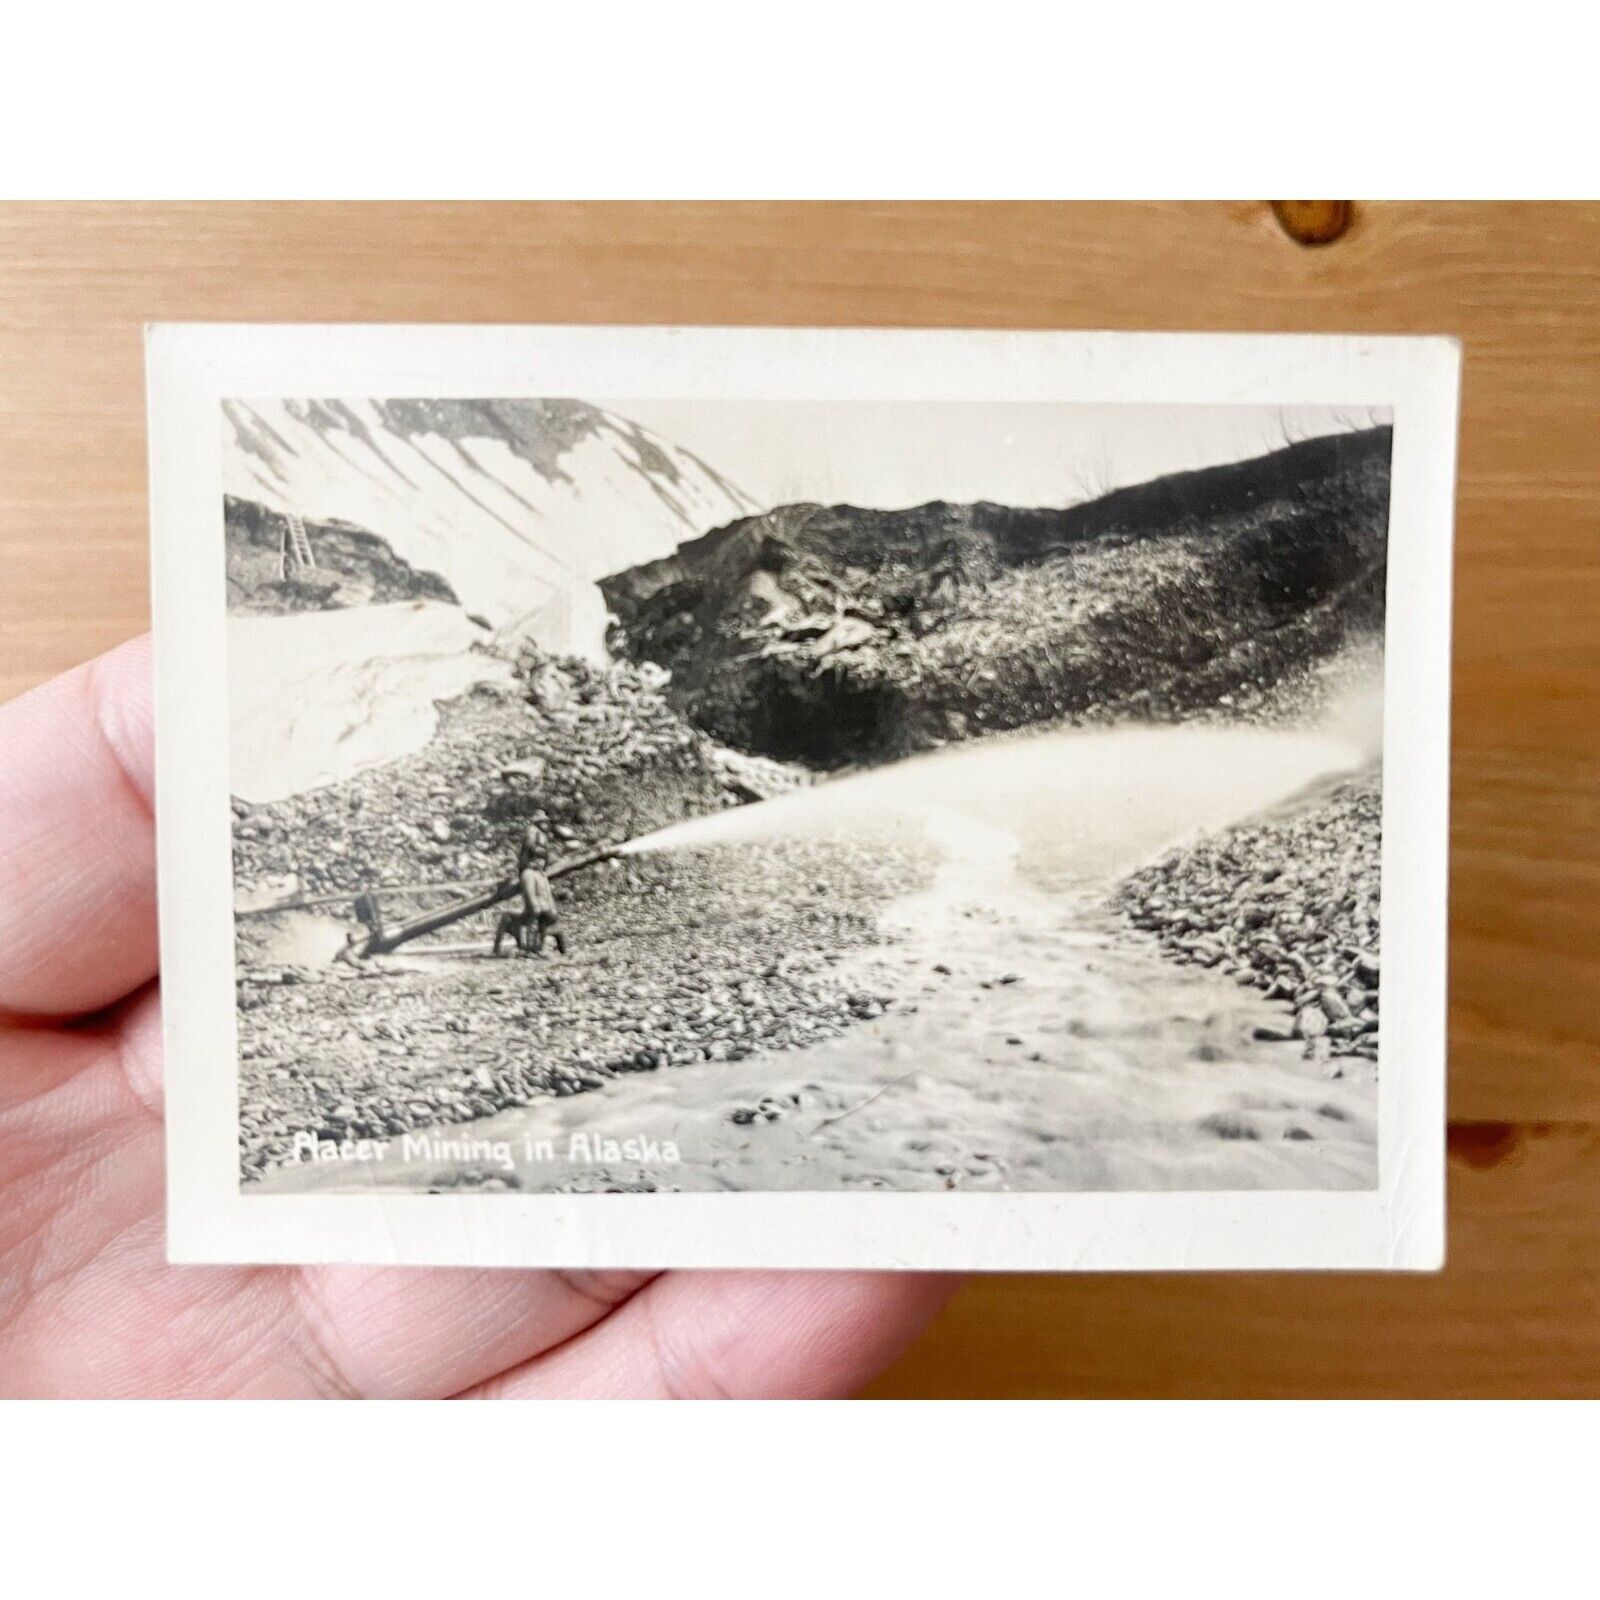 Vintage 1930s Black and White Placer Mining in Alaska Photo